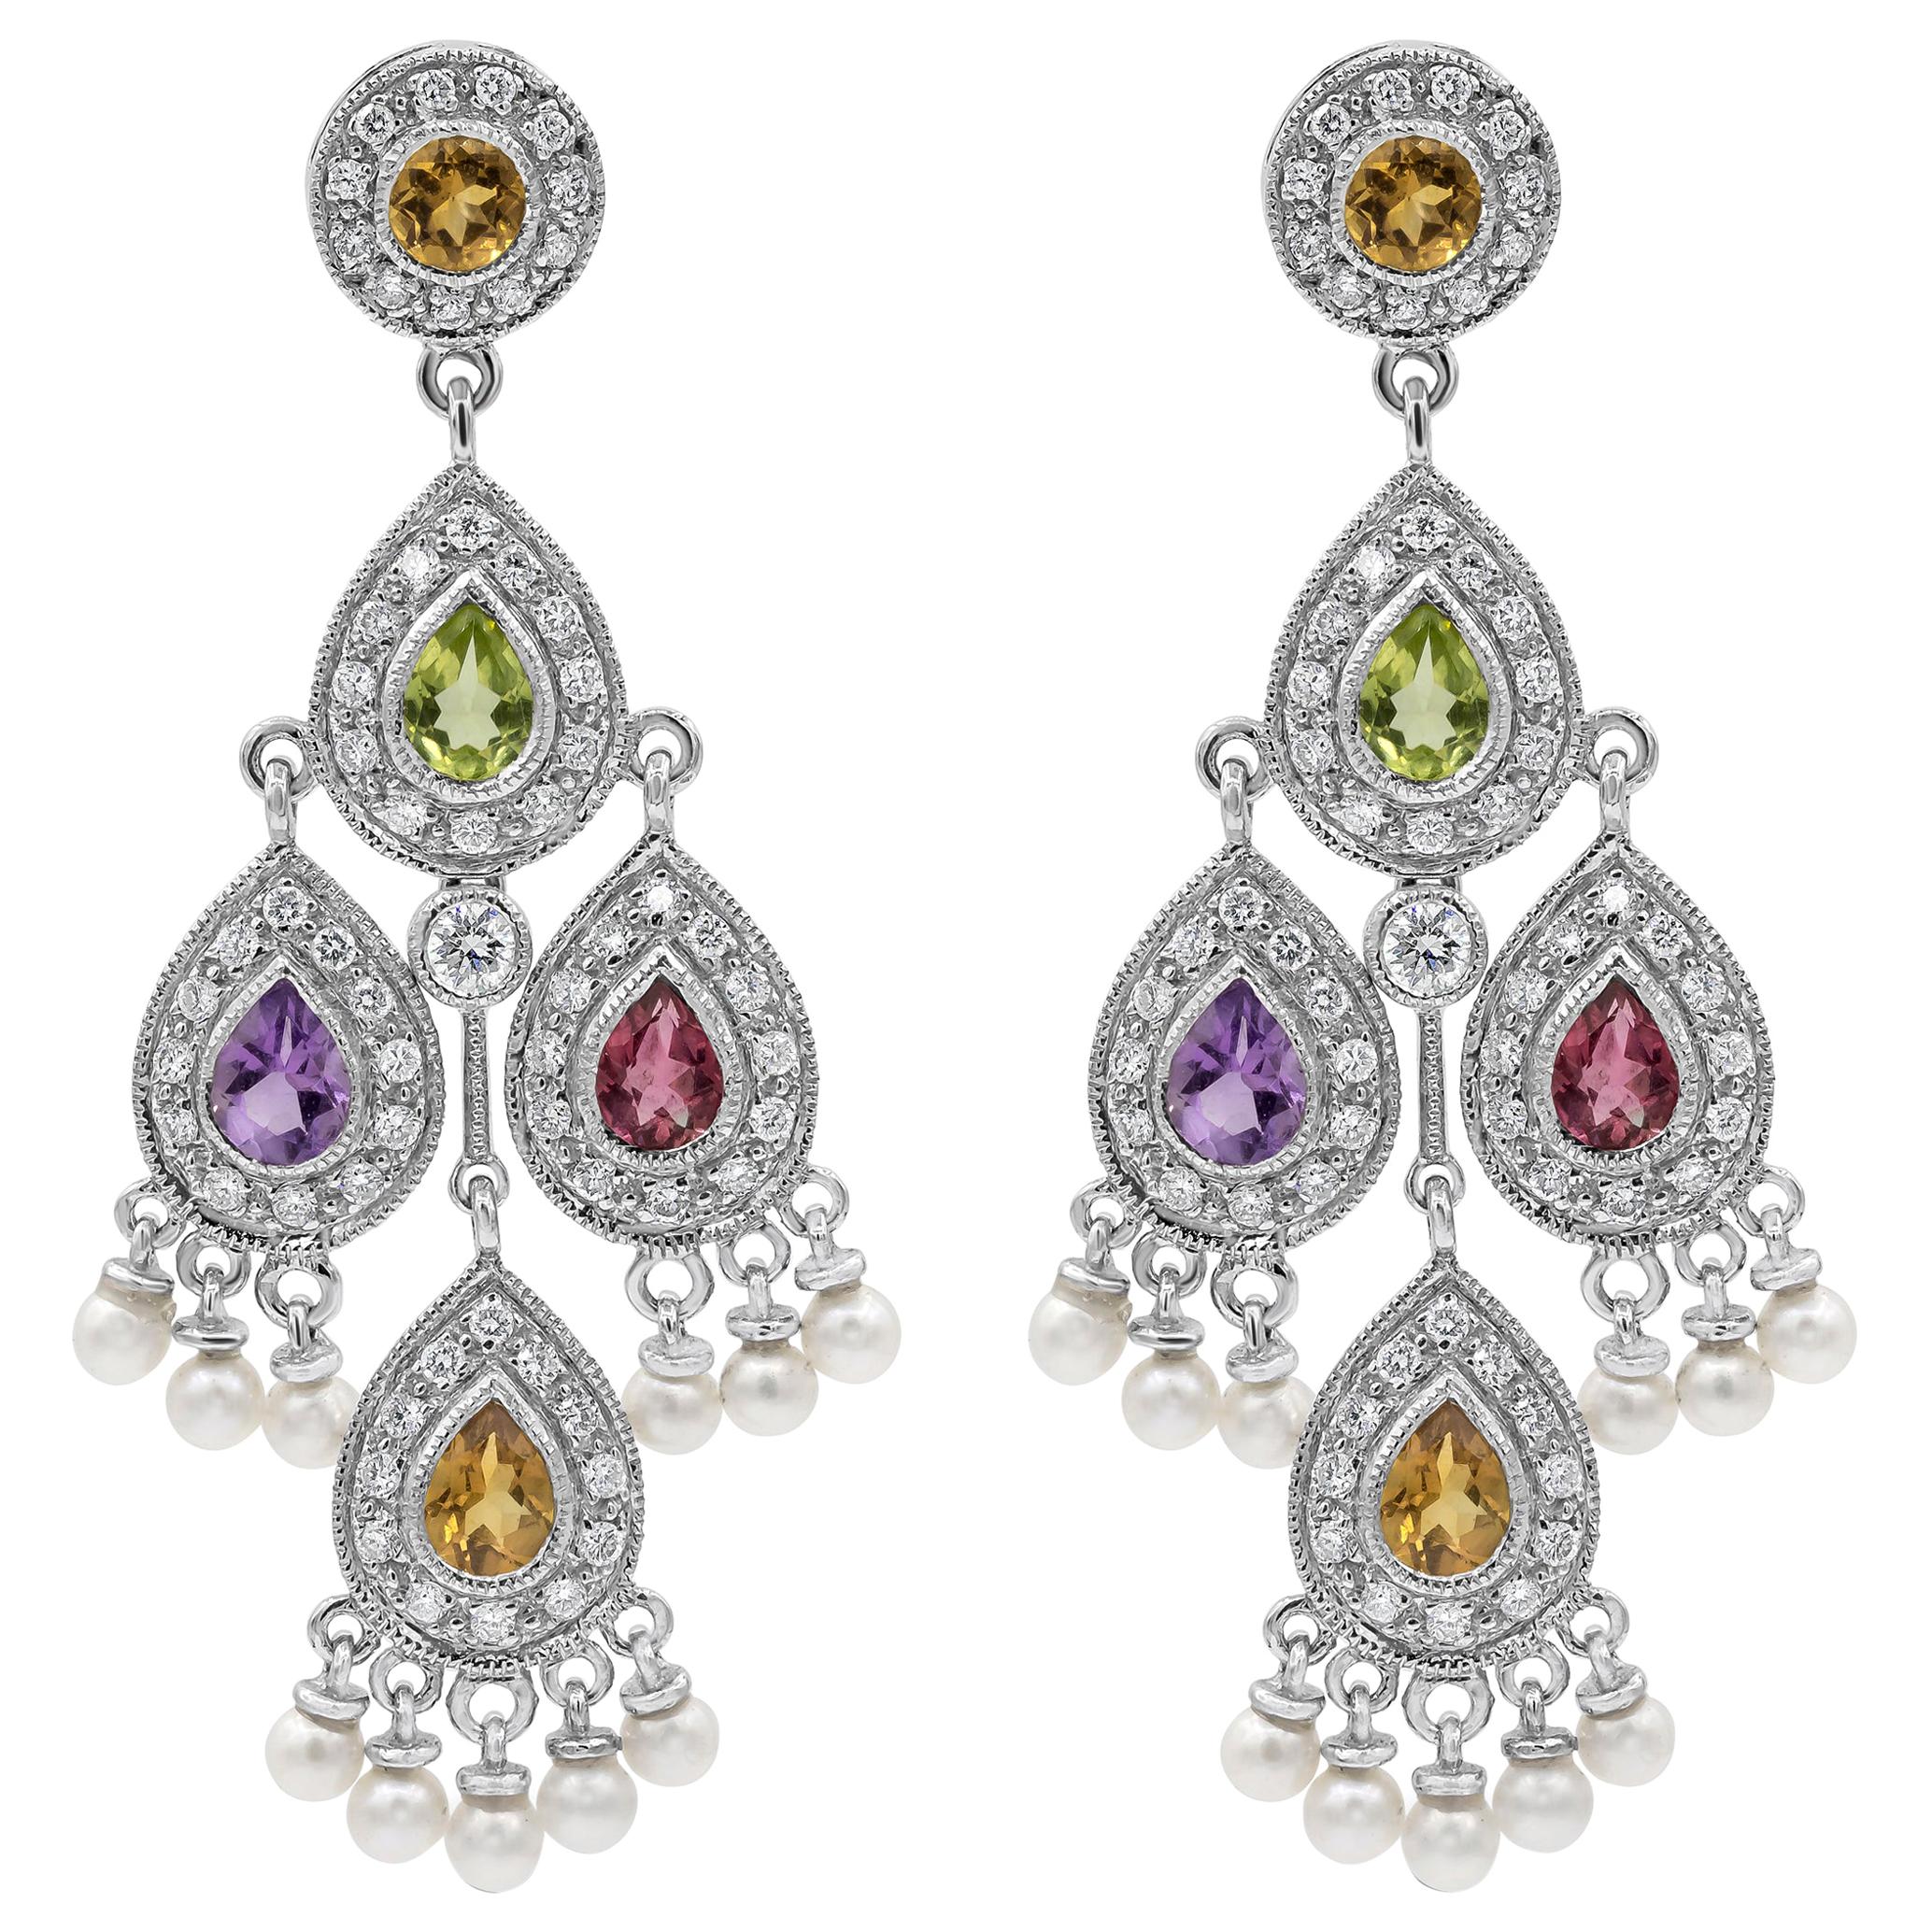 2.83 Carats Total Multi-Color Sapphire and Round Diamond Chandelier Earrings